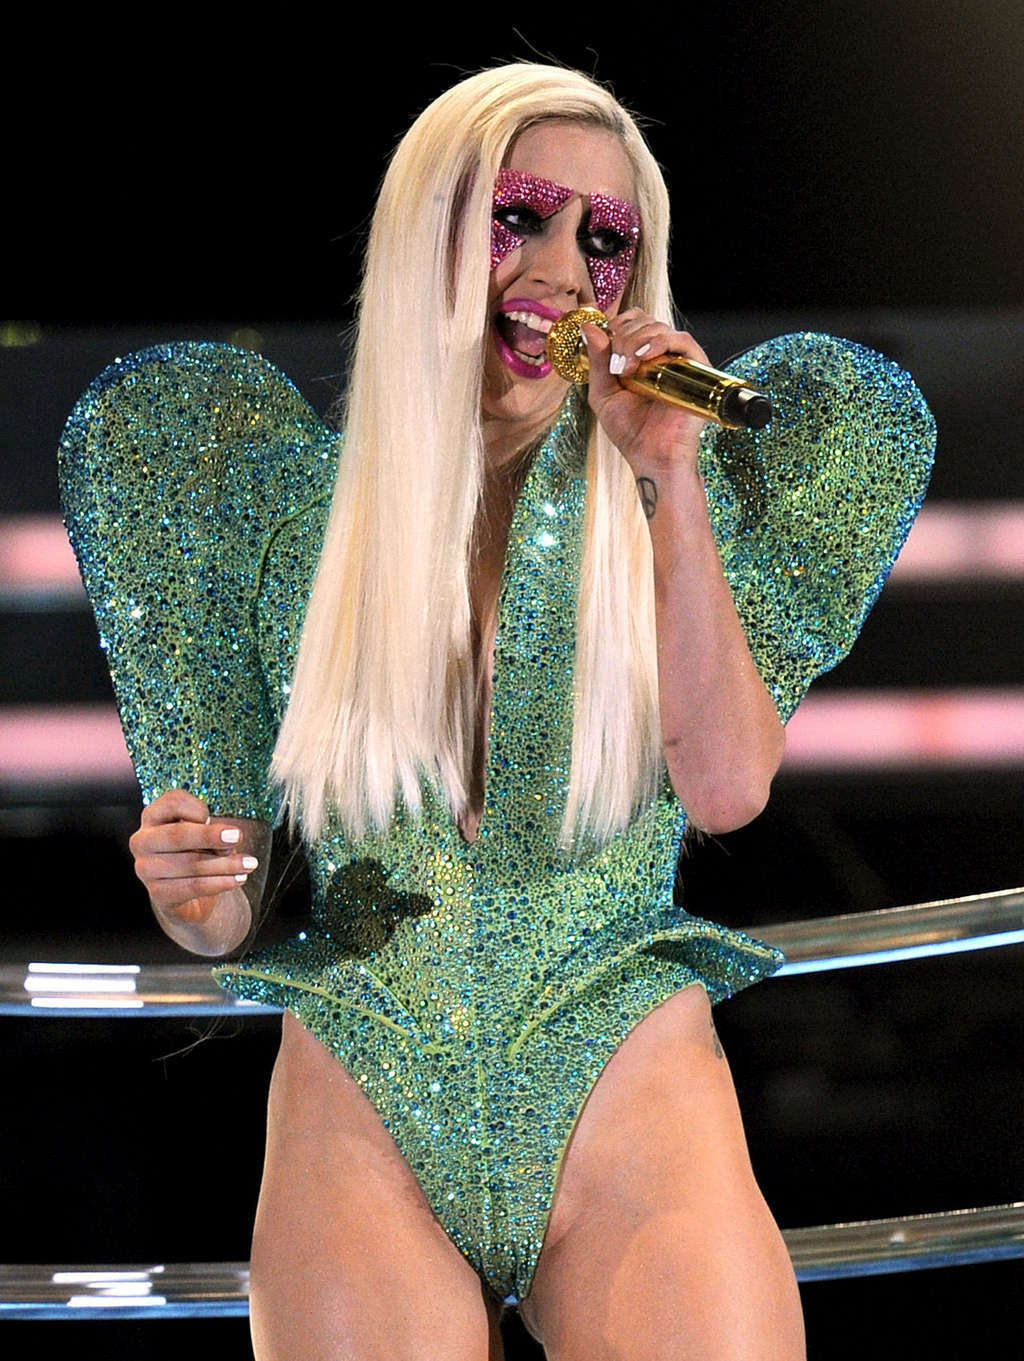 Lady Gaga exposing her nice ass in sexy outfit on stage #75360794